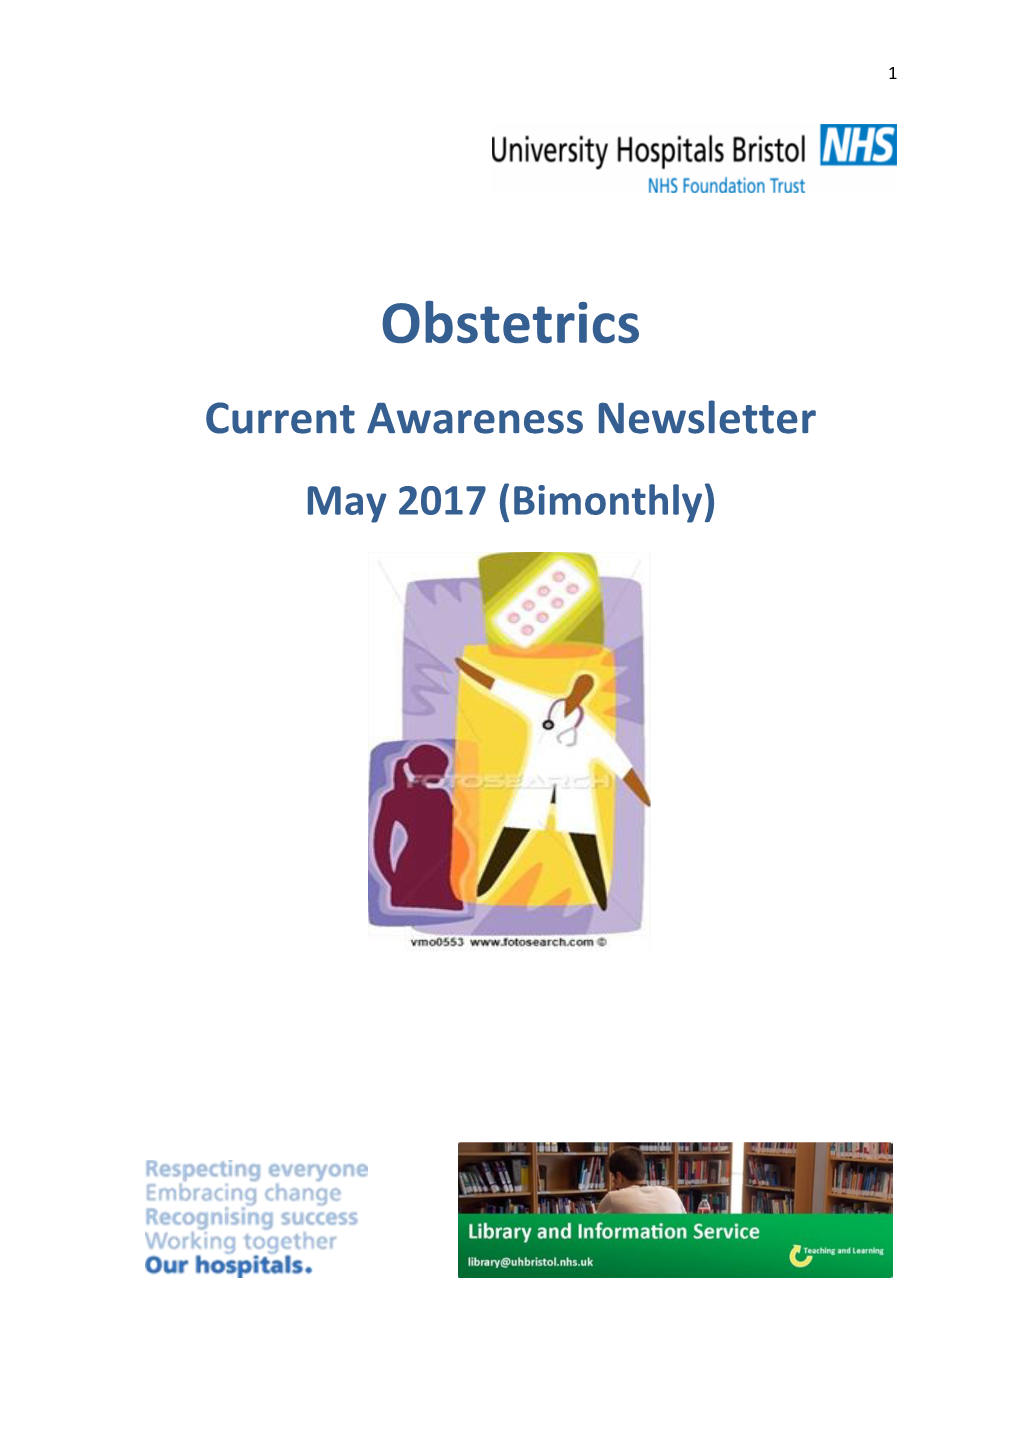 Obstetrics Current Awareness Newsletter May 2017 (Bimonthly)